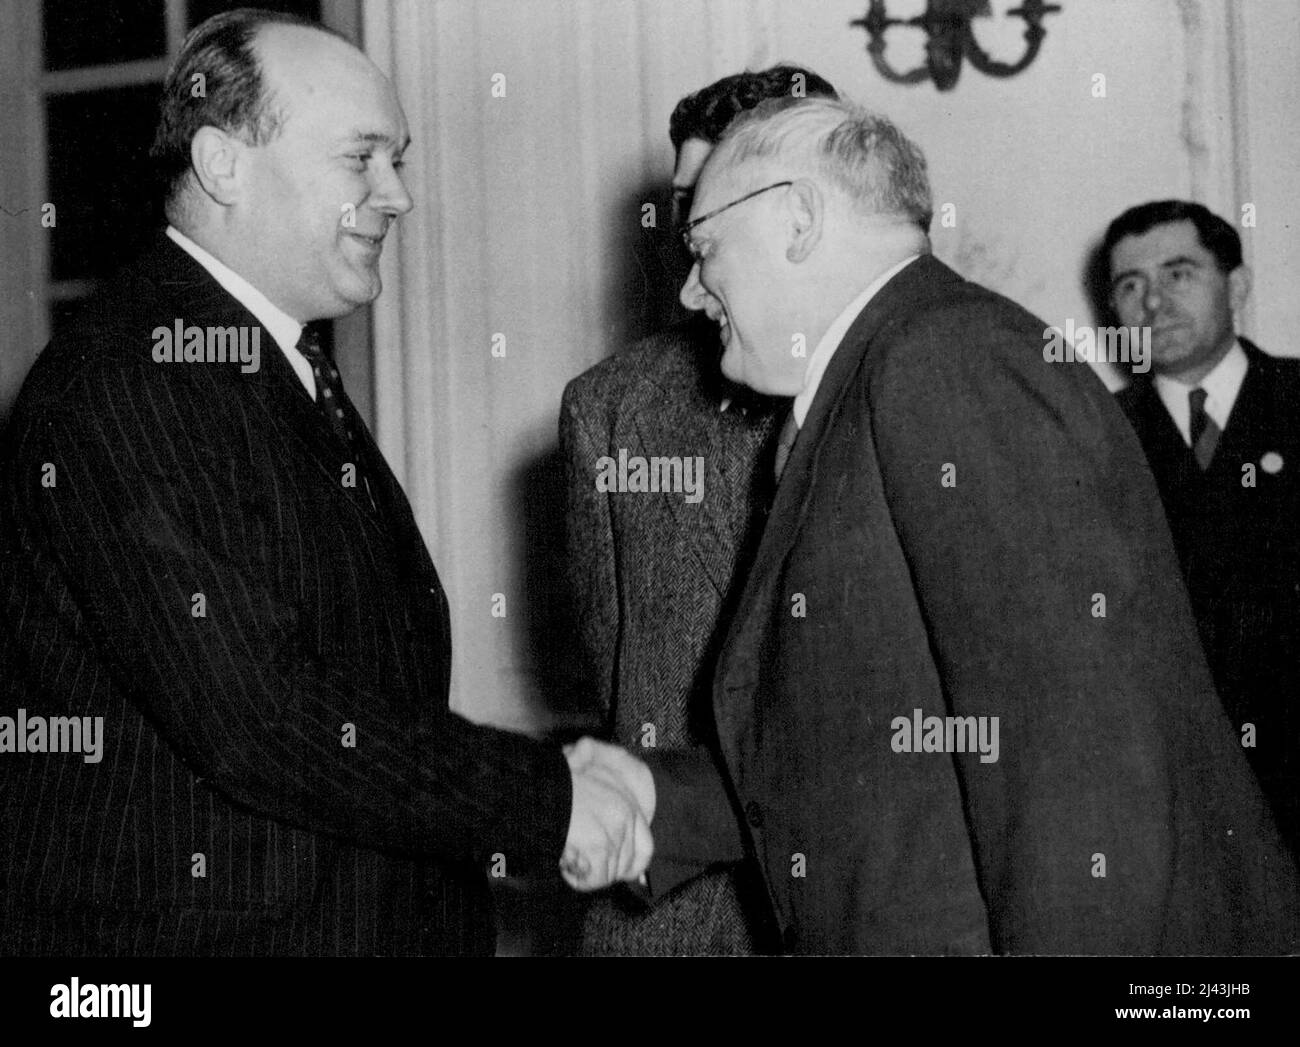 M. Spaak greets M. Vyshinsky ***** who has just arrived in ***** lead the USSR delegation. M. Spaak, the first permanent President of the ***** Assembly, was ***** yesterday evening at a reception for the delegates held at the *****. January 24, 1946. (Photo by Fox Photos). Stock Photo